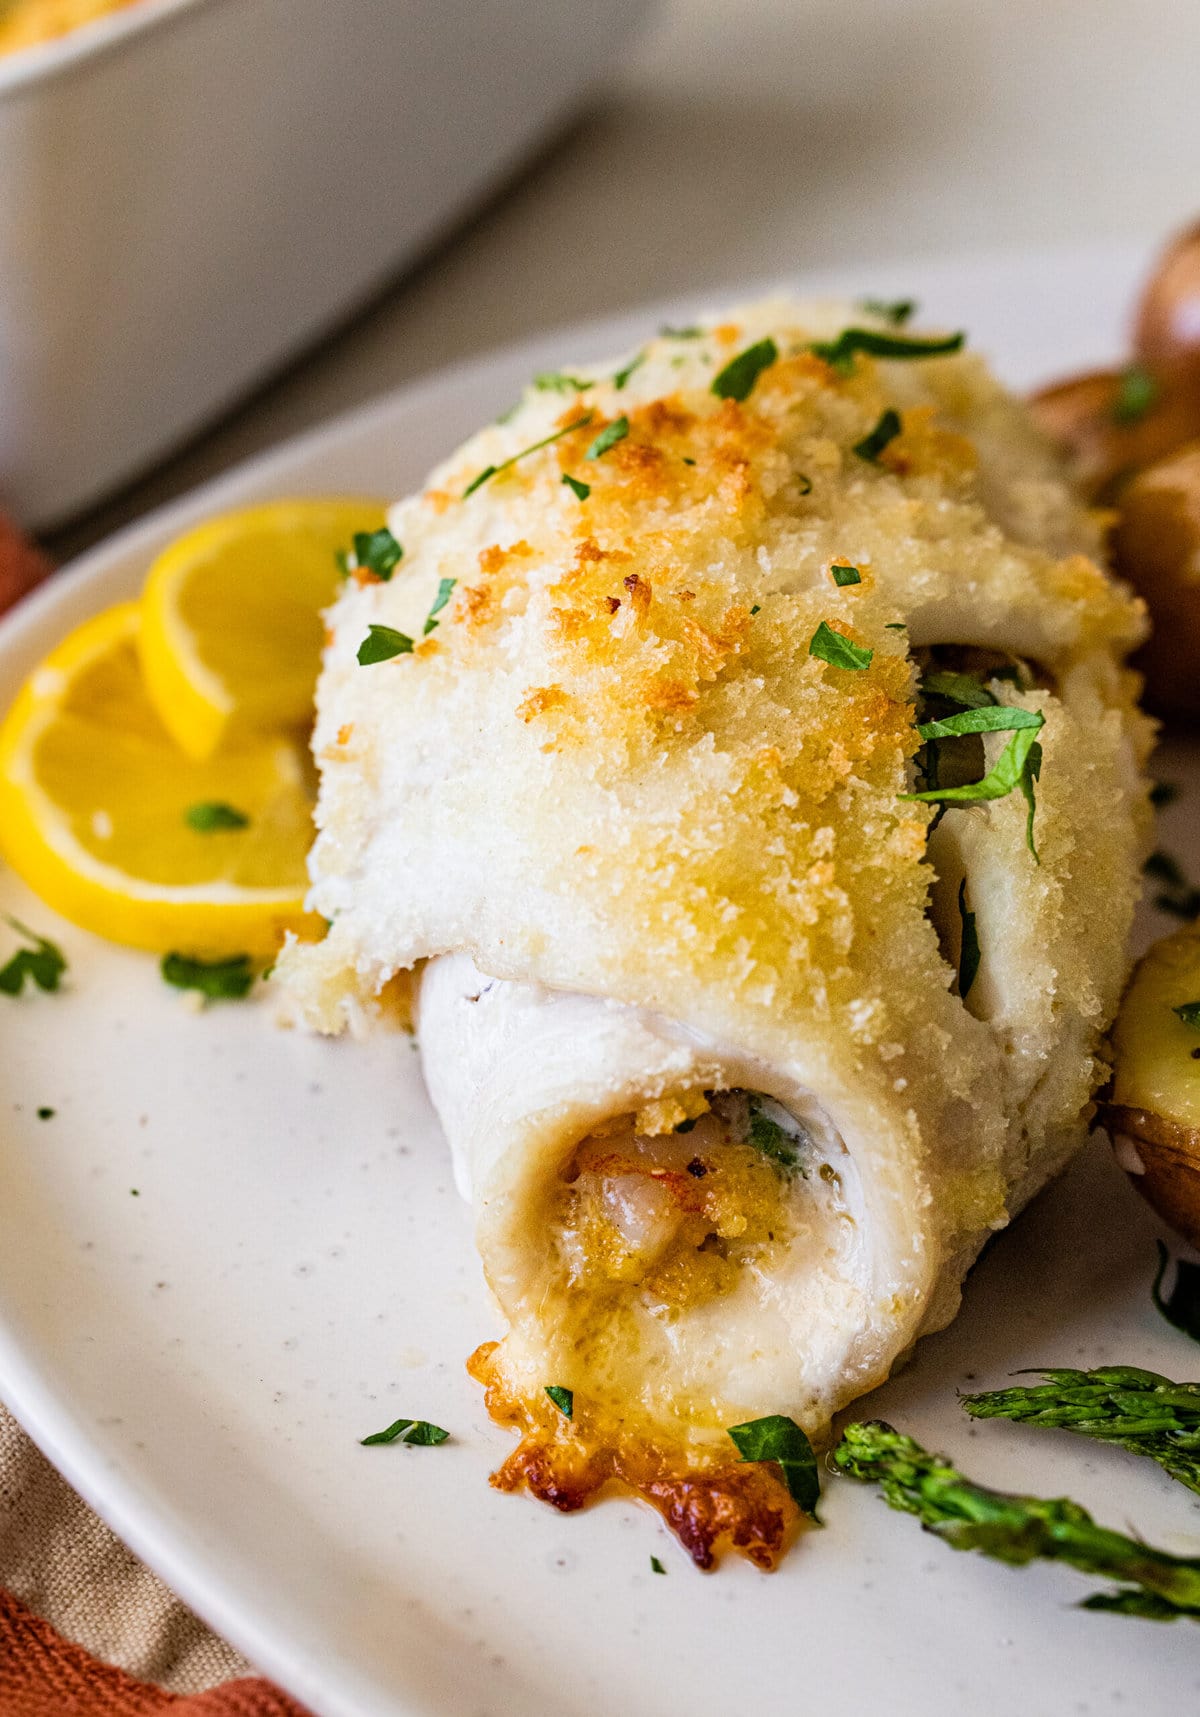 baked stuffed flounder on a plate with lemon wedges.